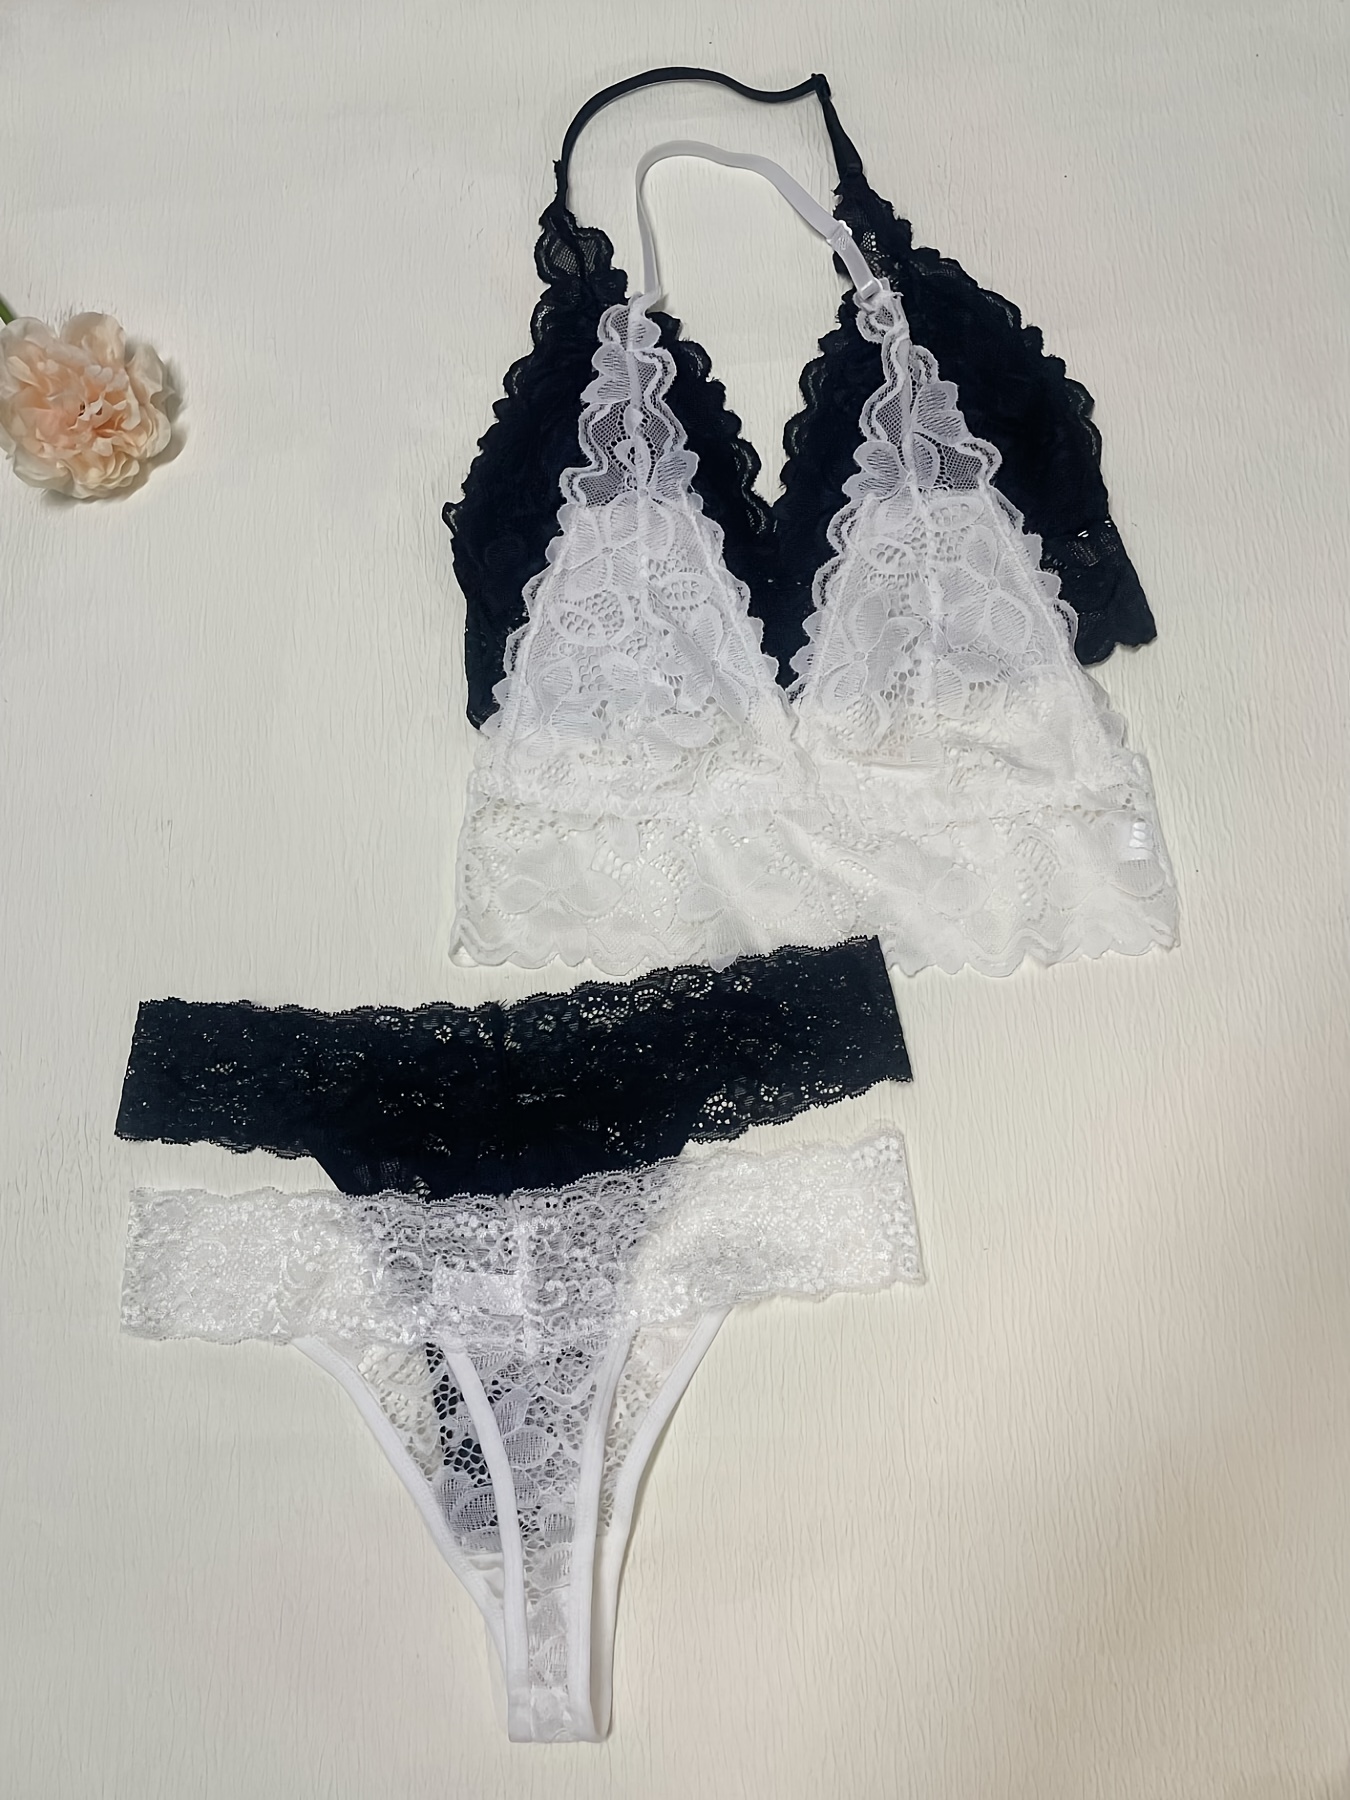 Sexy Bra and Panty Sets,Embroidered Lace Floral Lingerie for